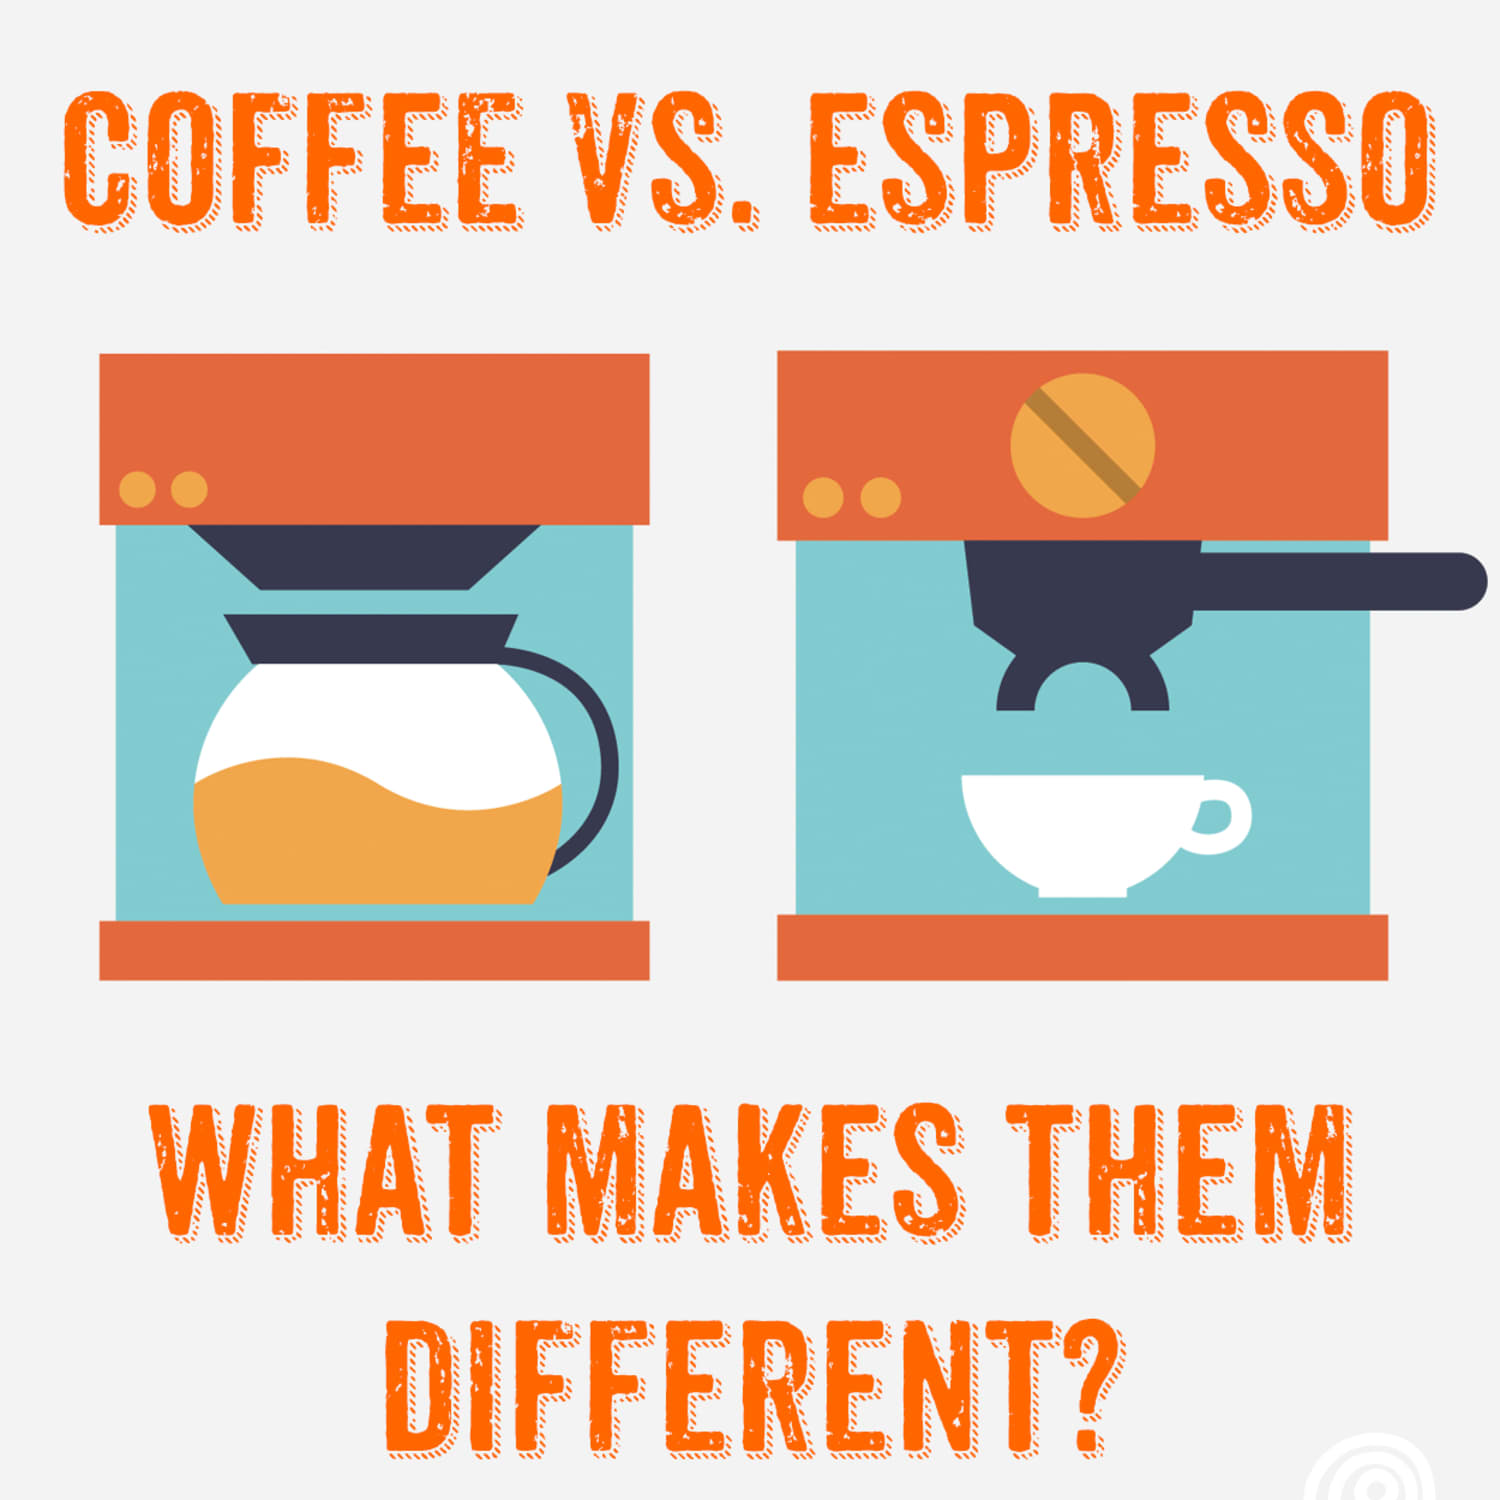 What Is Espresso? And How Is It Different from Coffee?